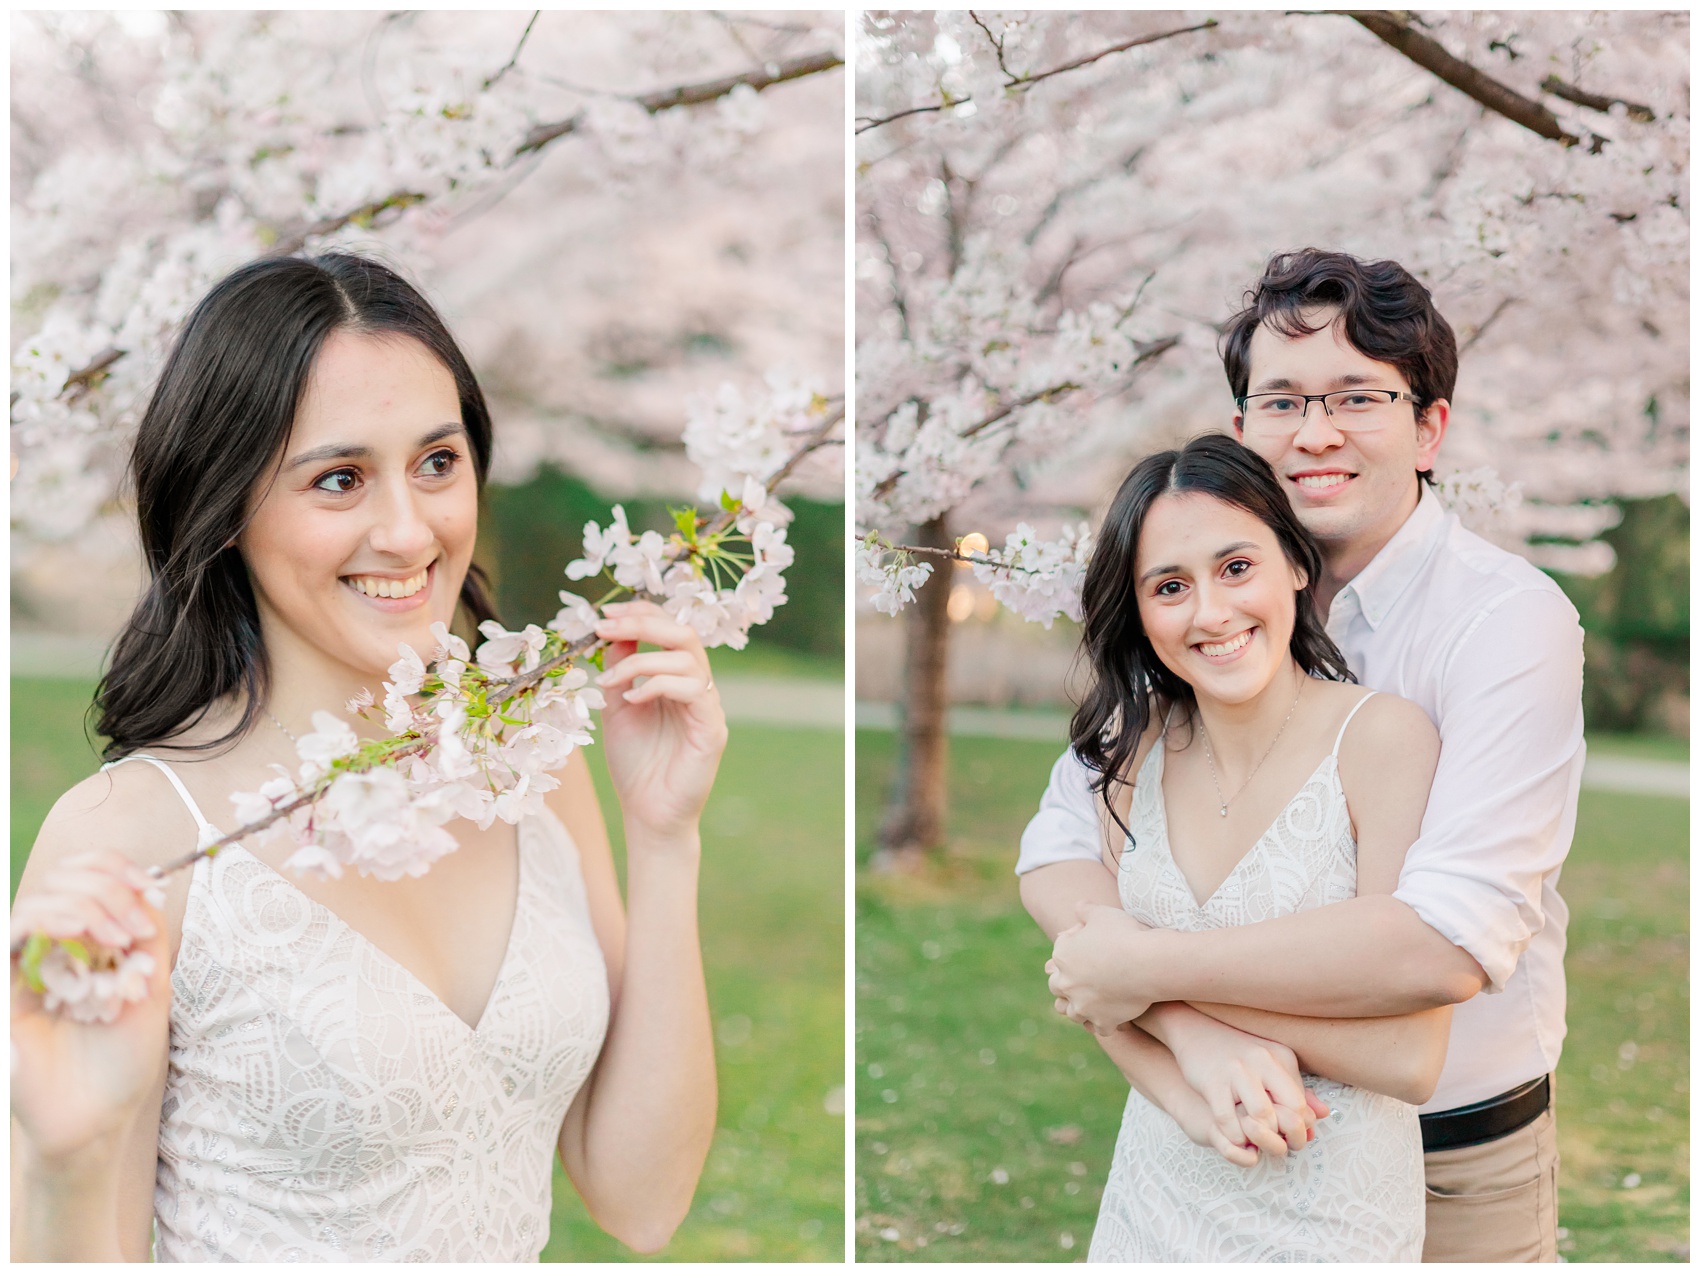 Richmond BC Engagement Photos at Minoru Park with cherry blossoms